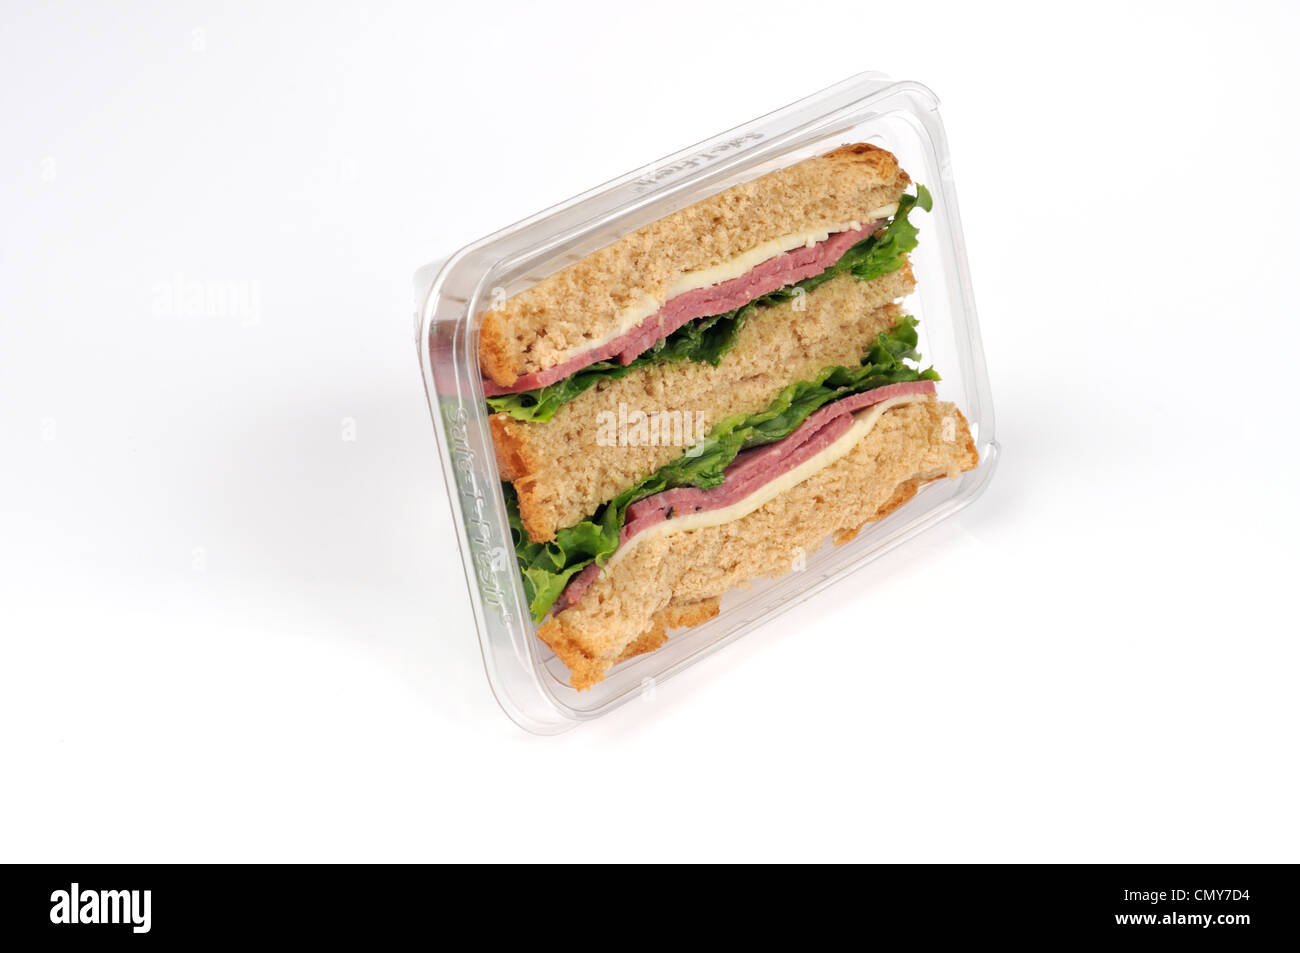 Salami and cheese takeaway sandwich on whole wheat bread Stock Photo